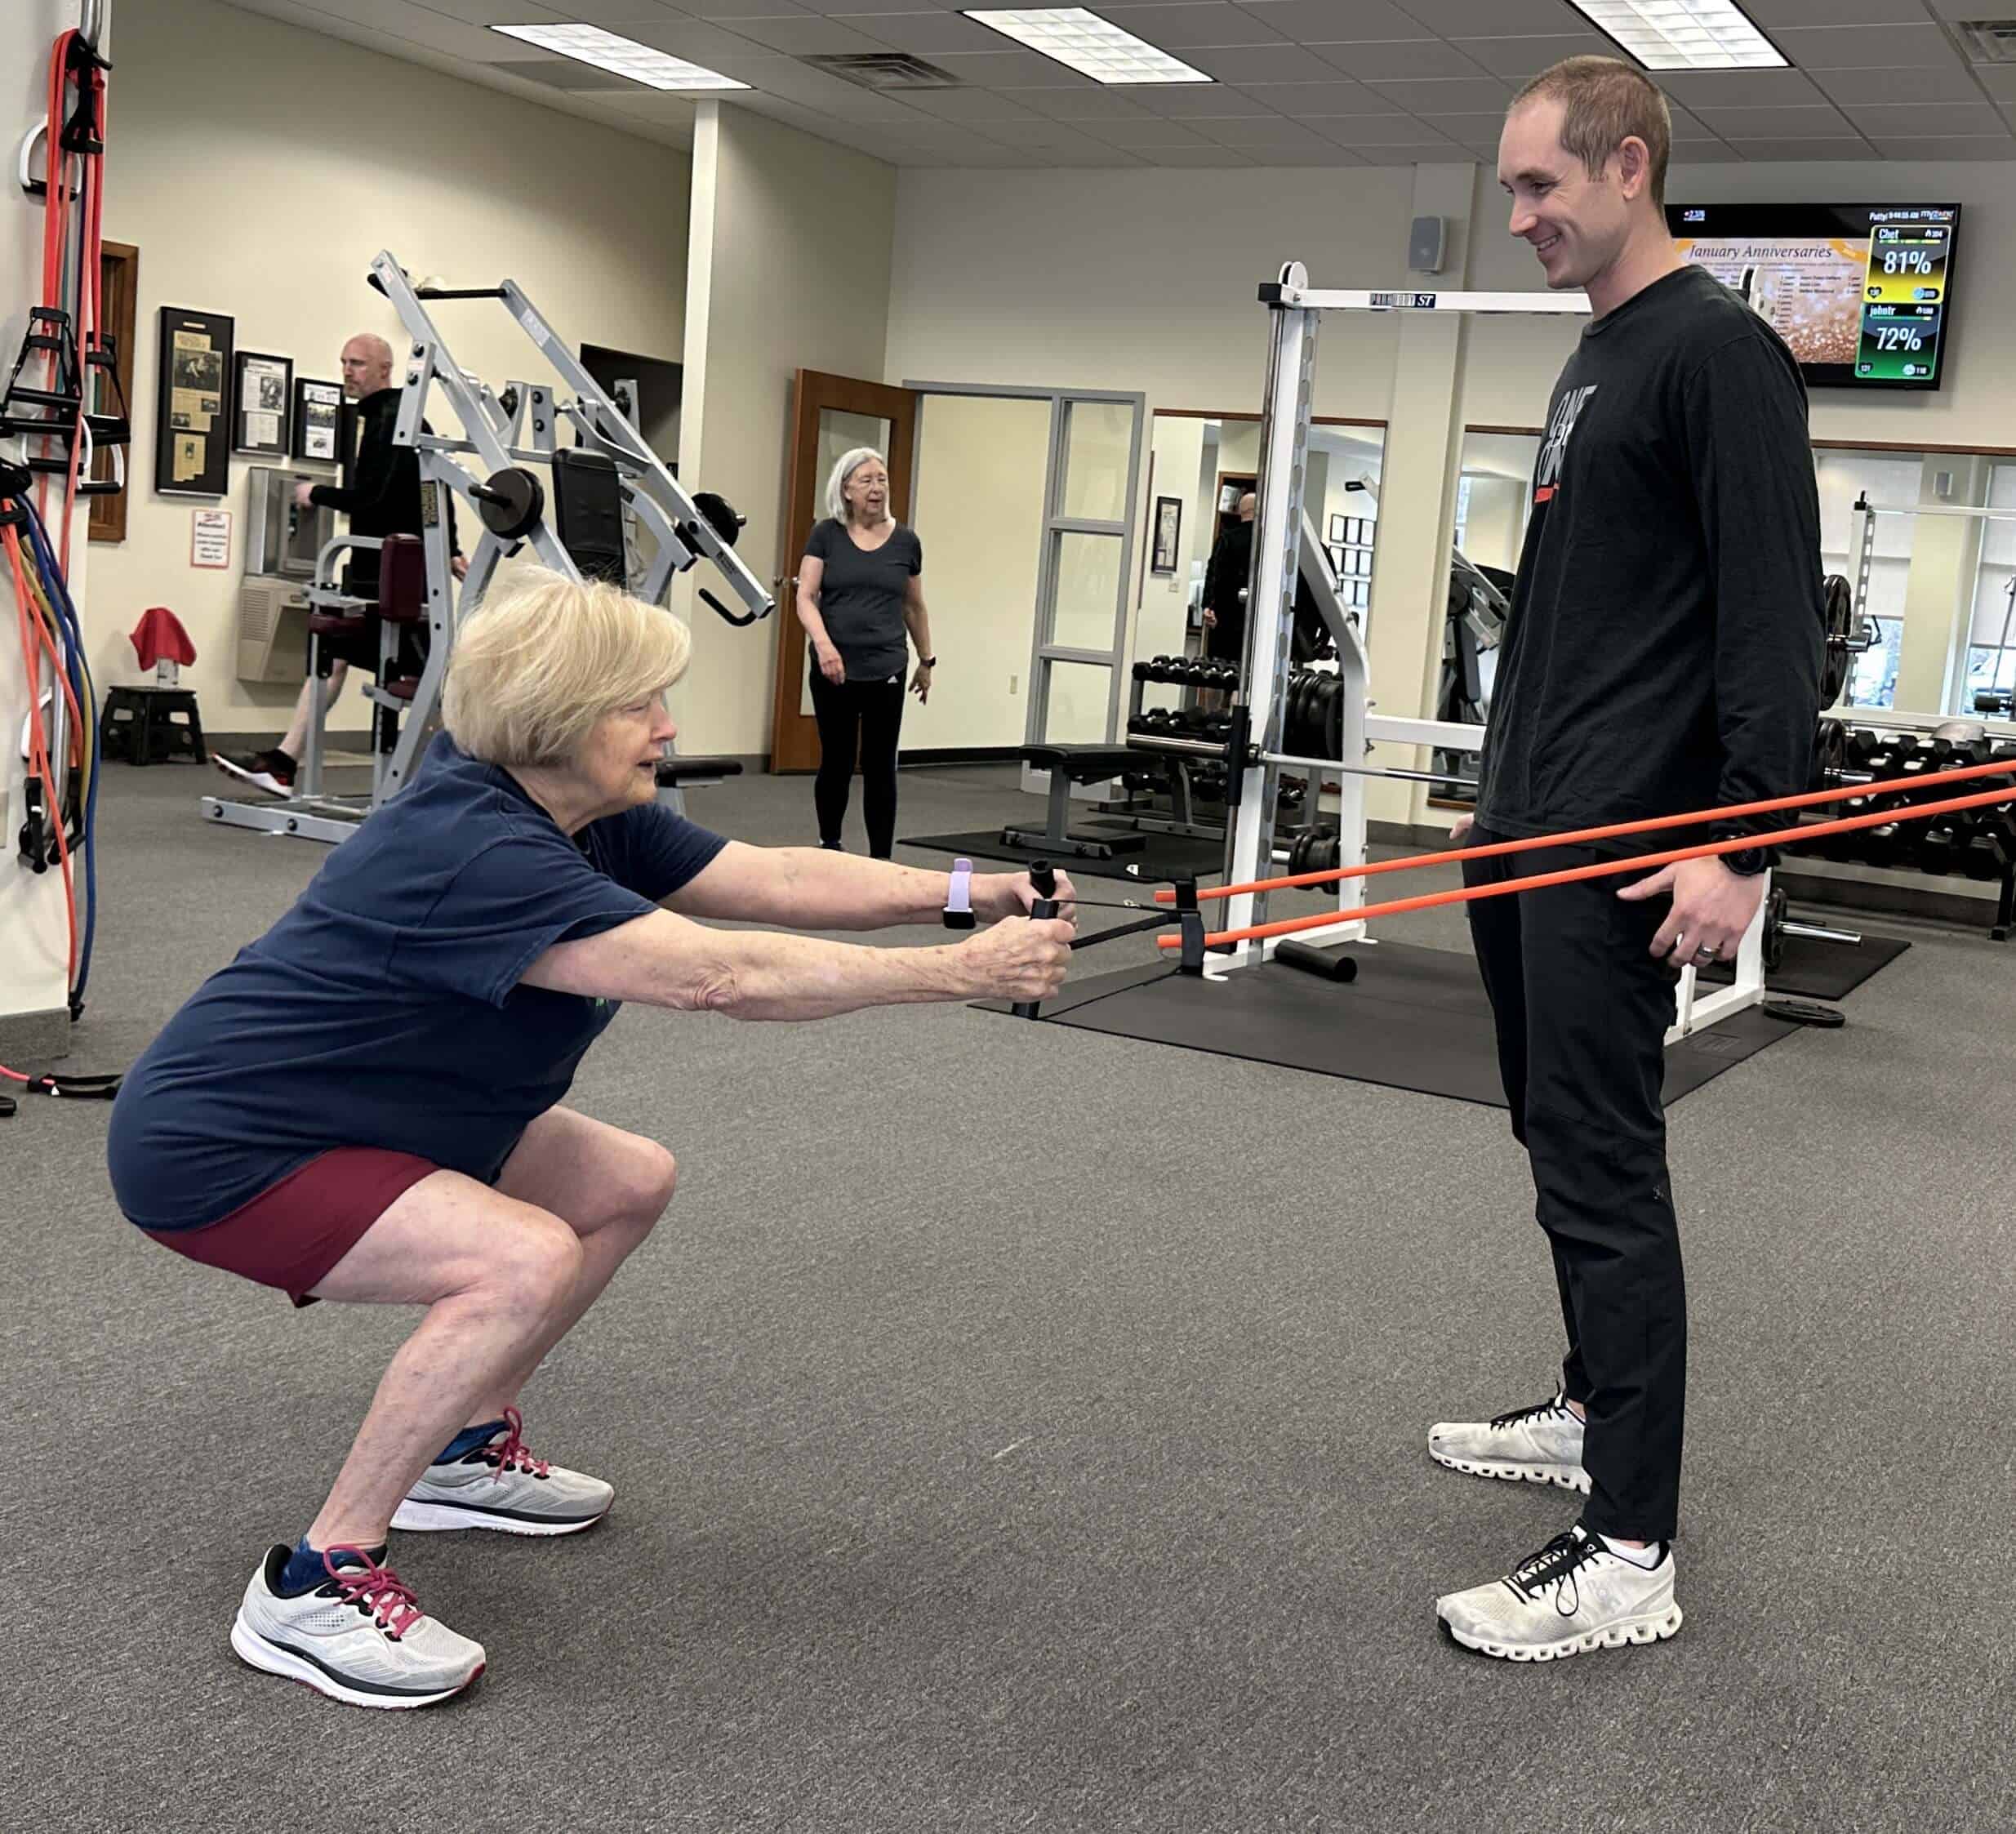 Client performing an assisted squat during her personal training session